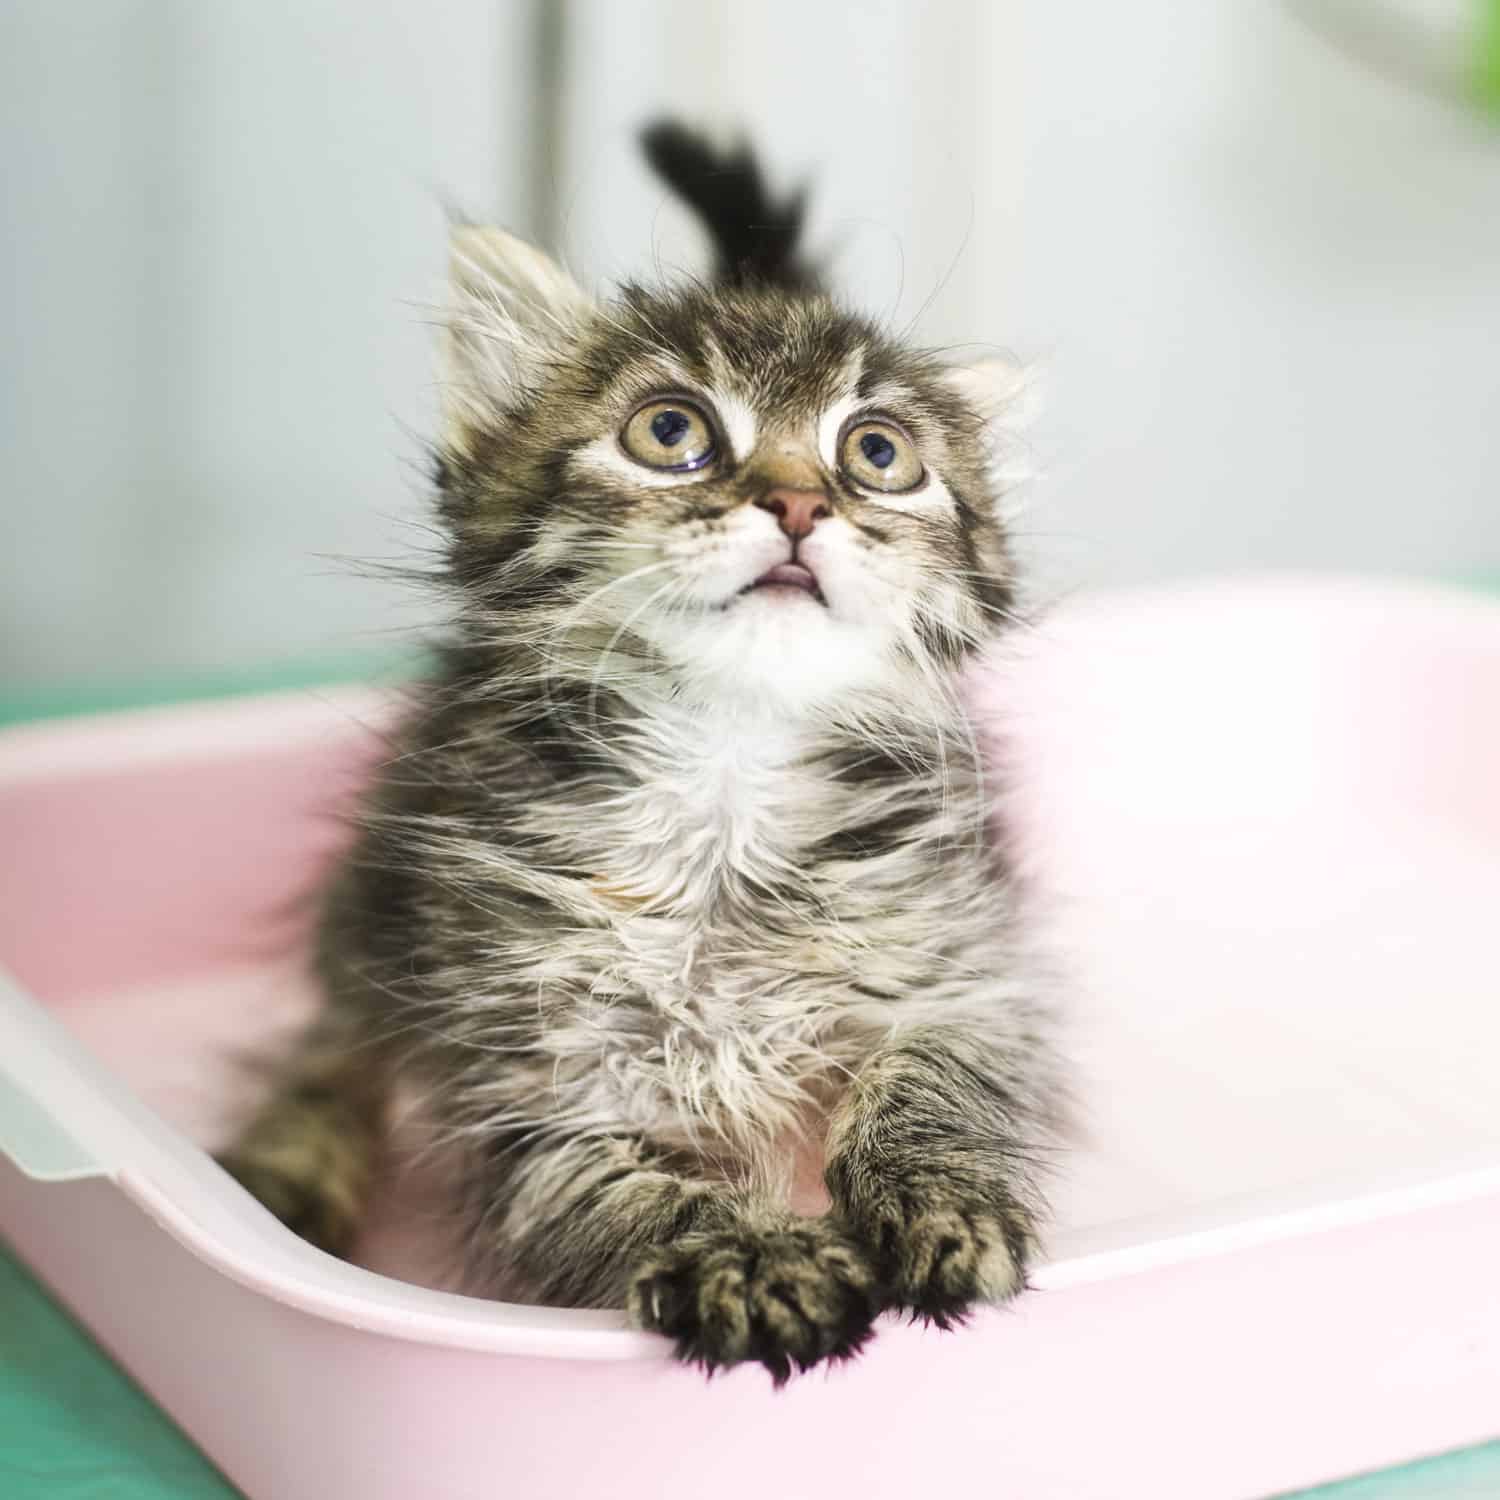 A cute kitten watching his owner from the litter box